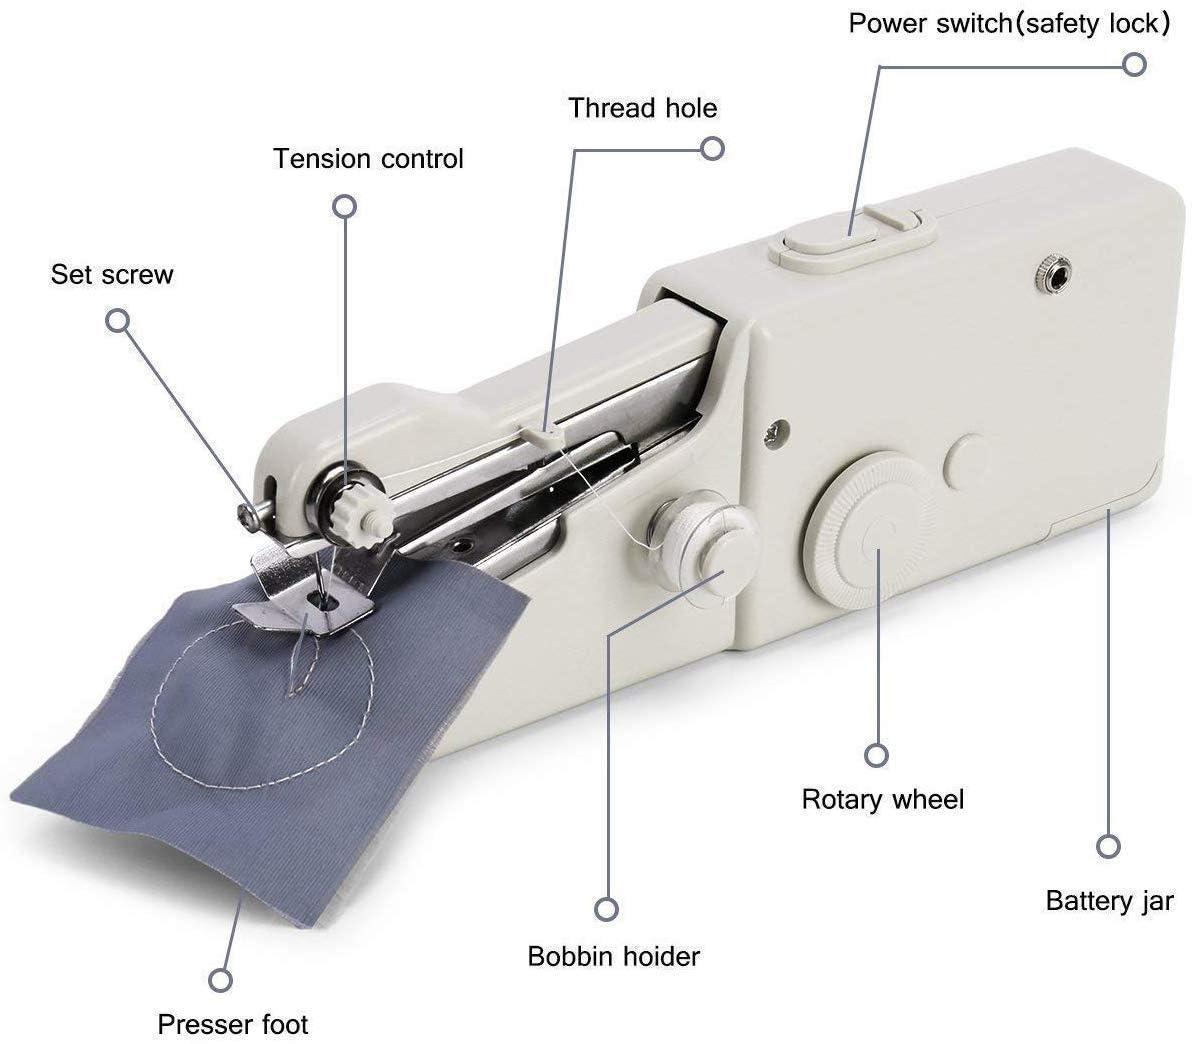 MINI PORTABLE SEWING MACHINES FOR HOME TAILORING USE AC/DC ELECTRIC